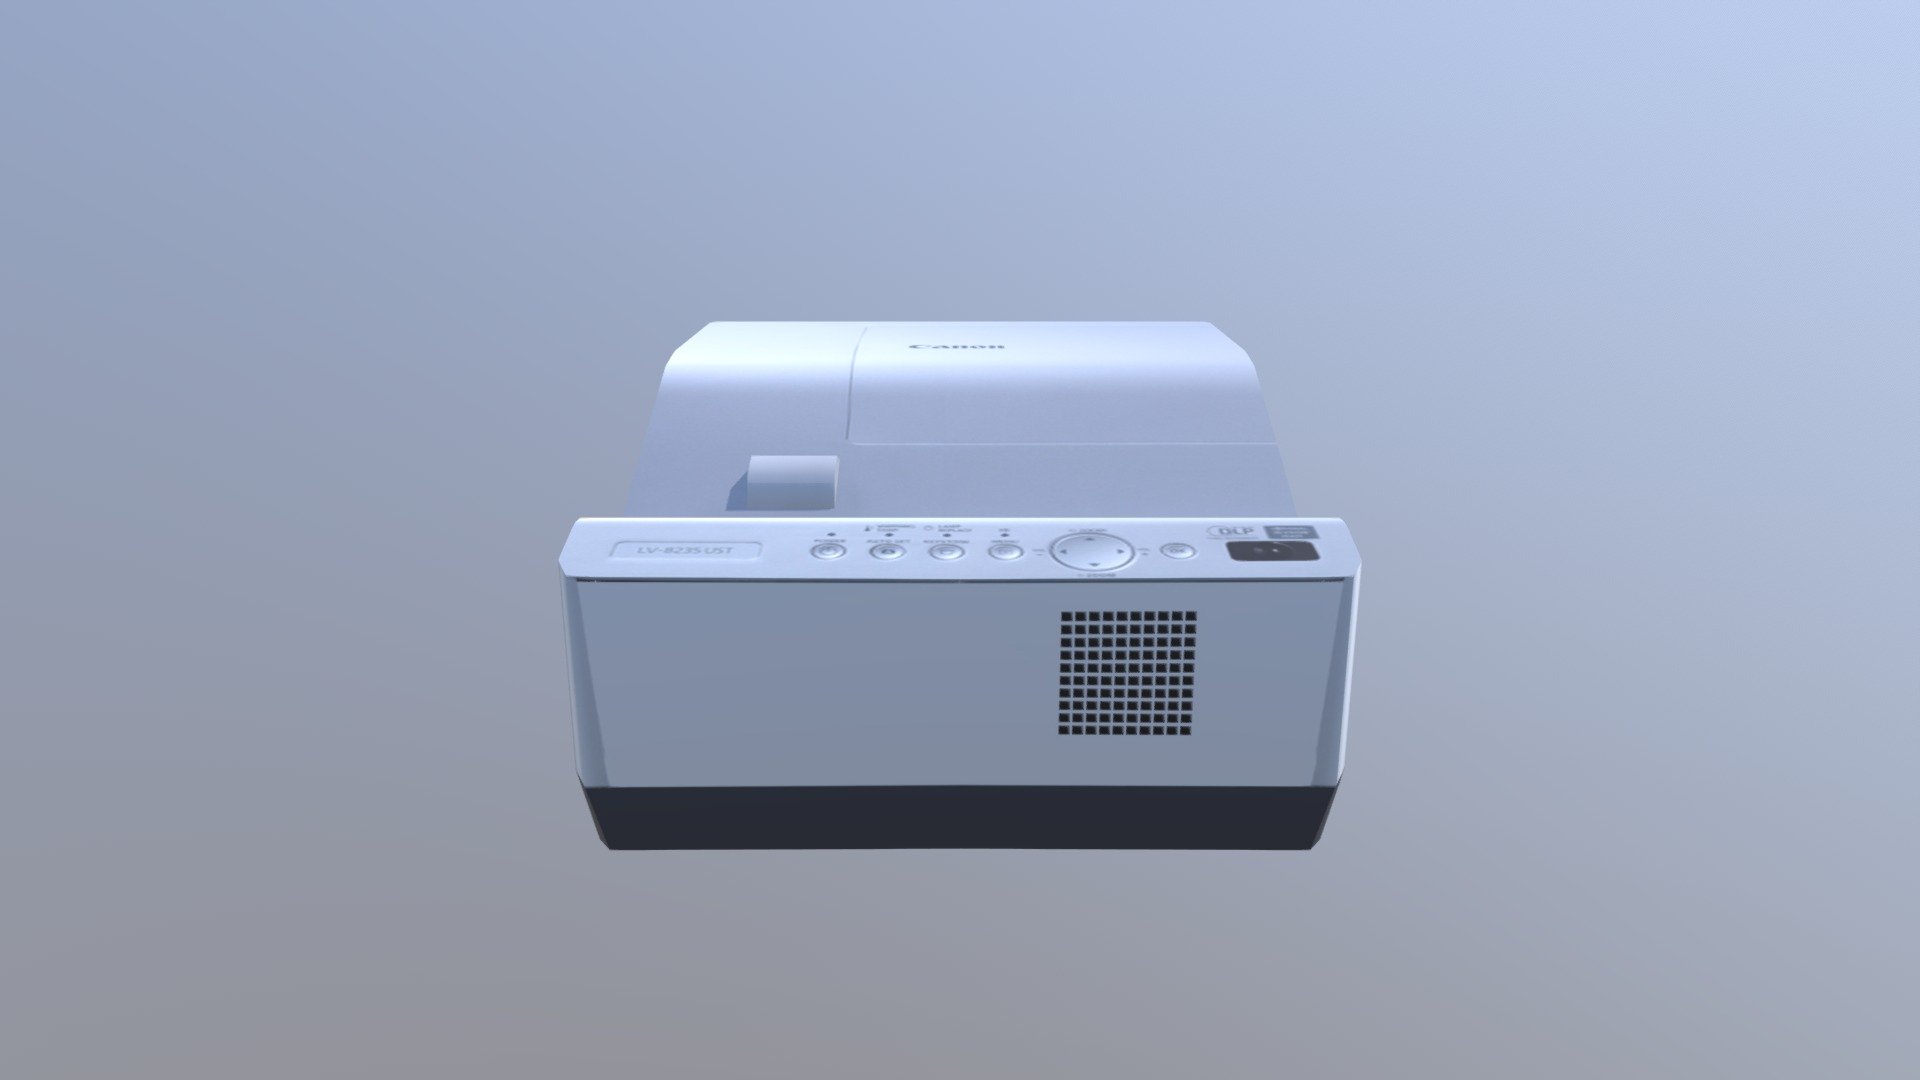 Low poly model of Canon projector designed and optimized for a project on the HTC Vive 3d model